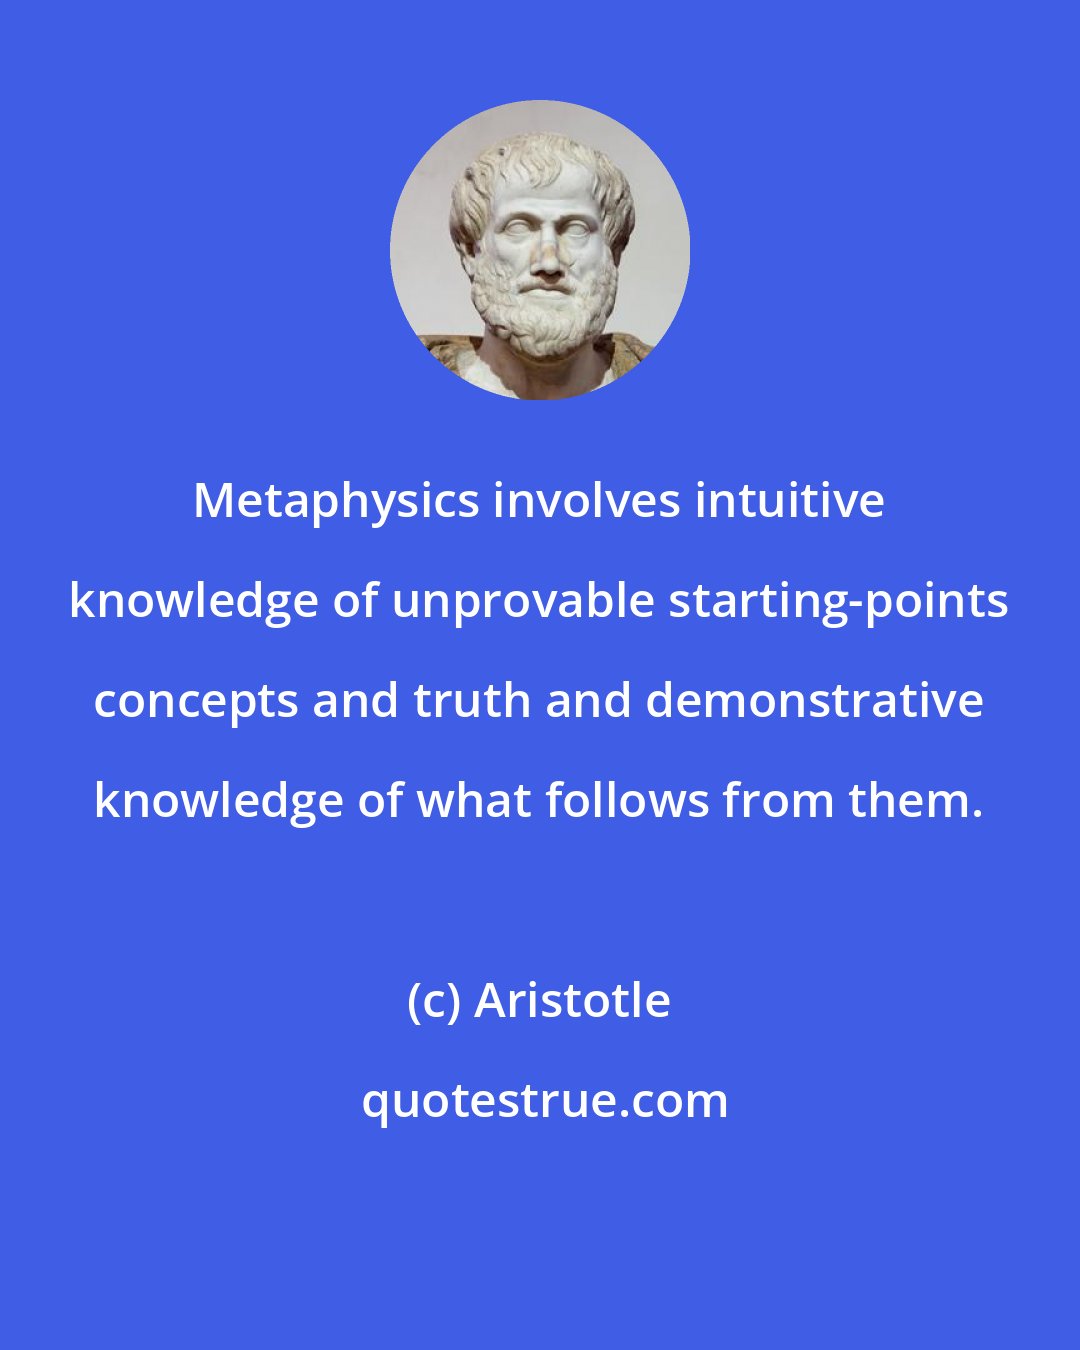 Aristotle: Metaphysics involves intuitive knowledge of unprovable starting-points concepts and truth and demonstrative knowledge of what follows from them.